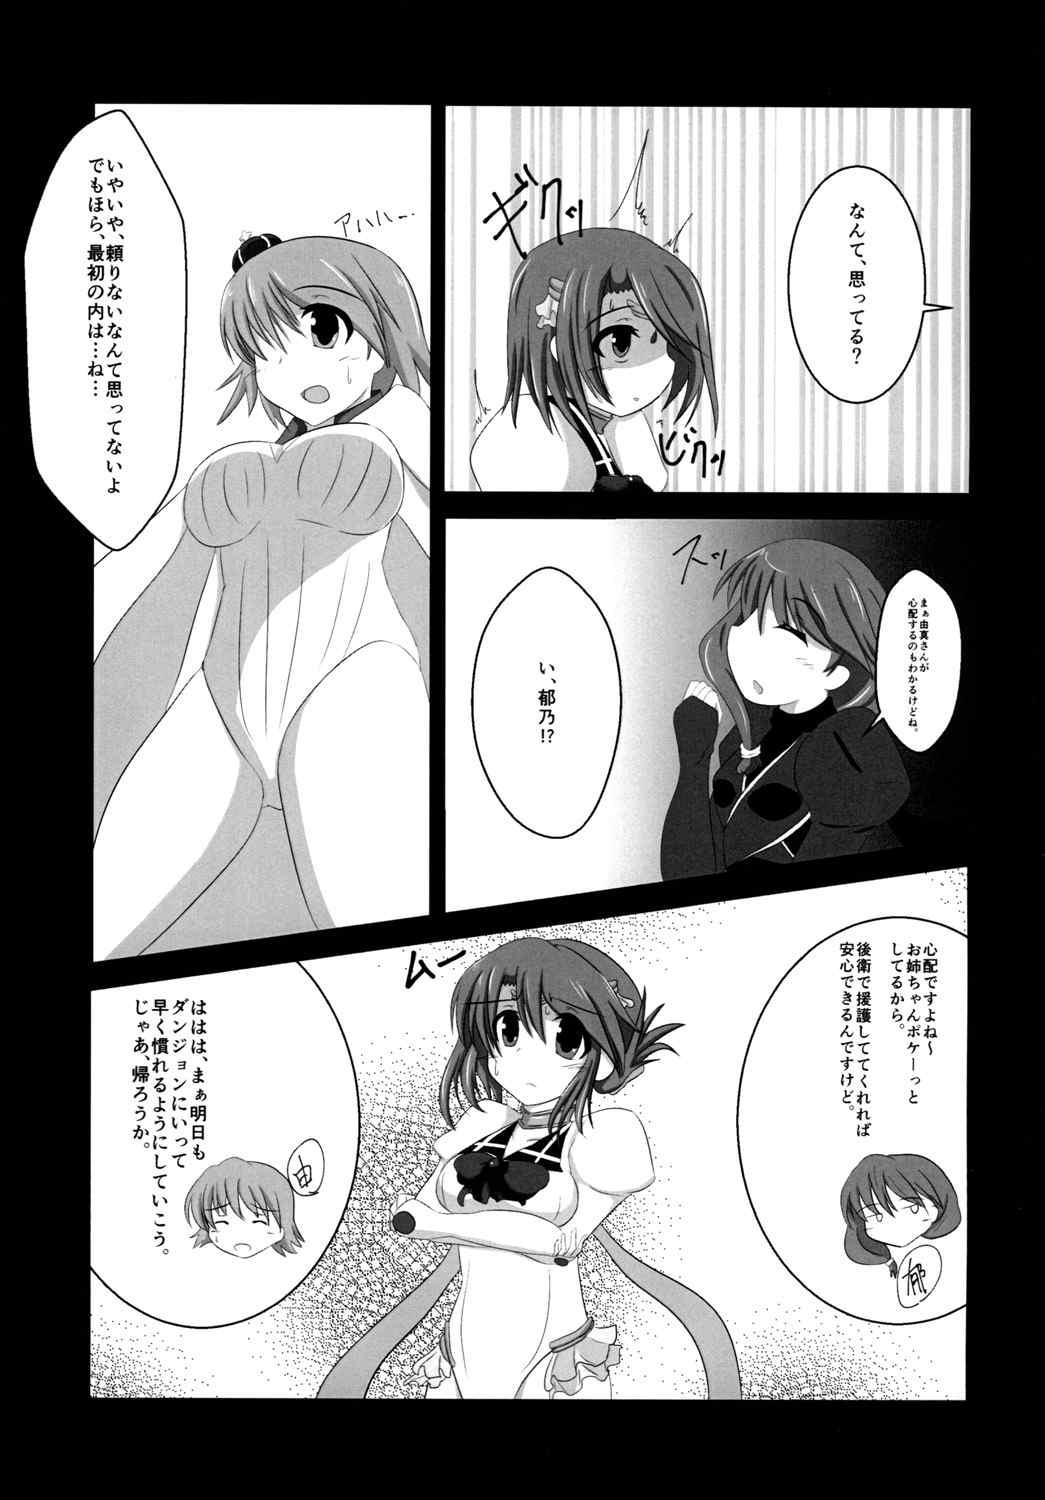 Hot Manaka Lost - Toheart2 Gets - Page 5